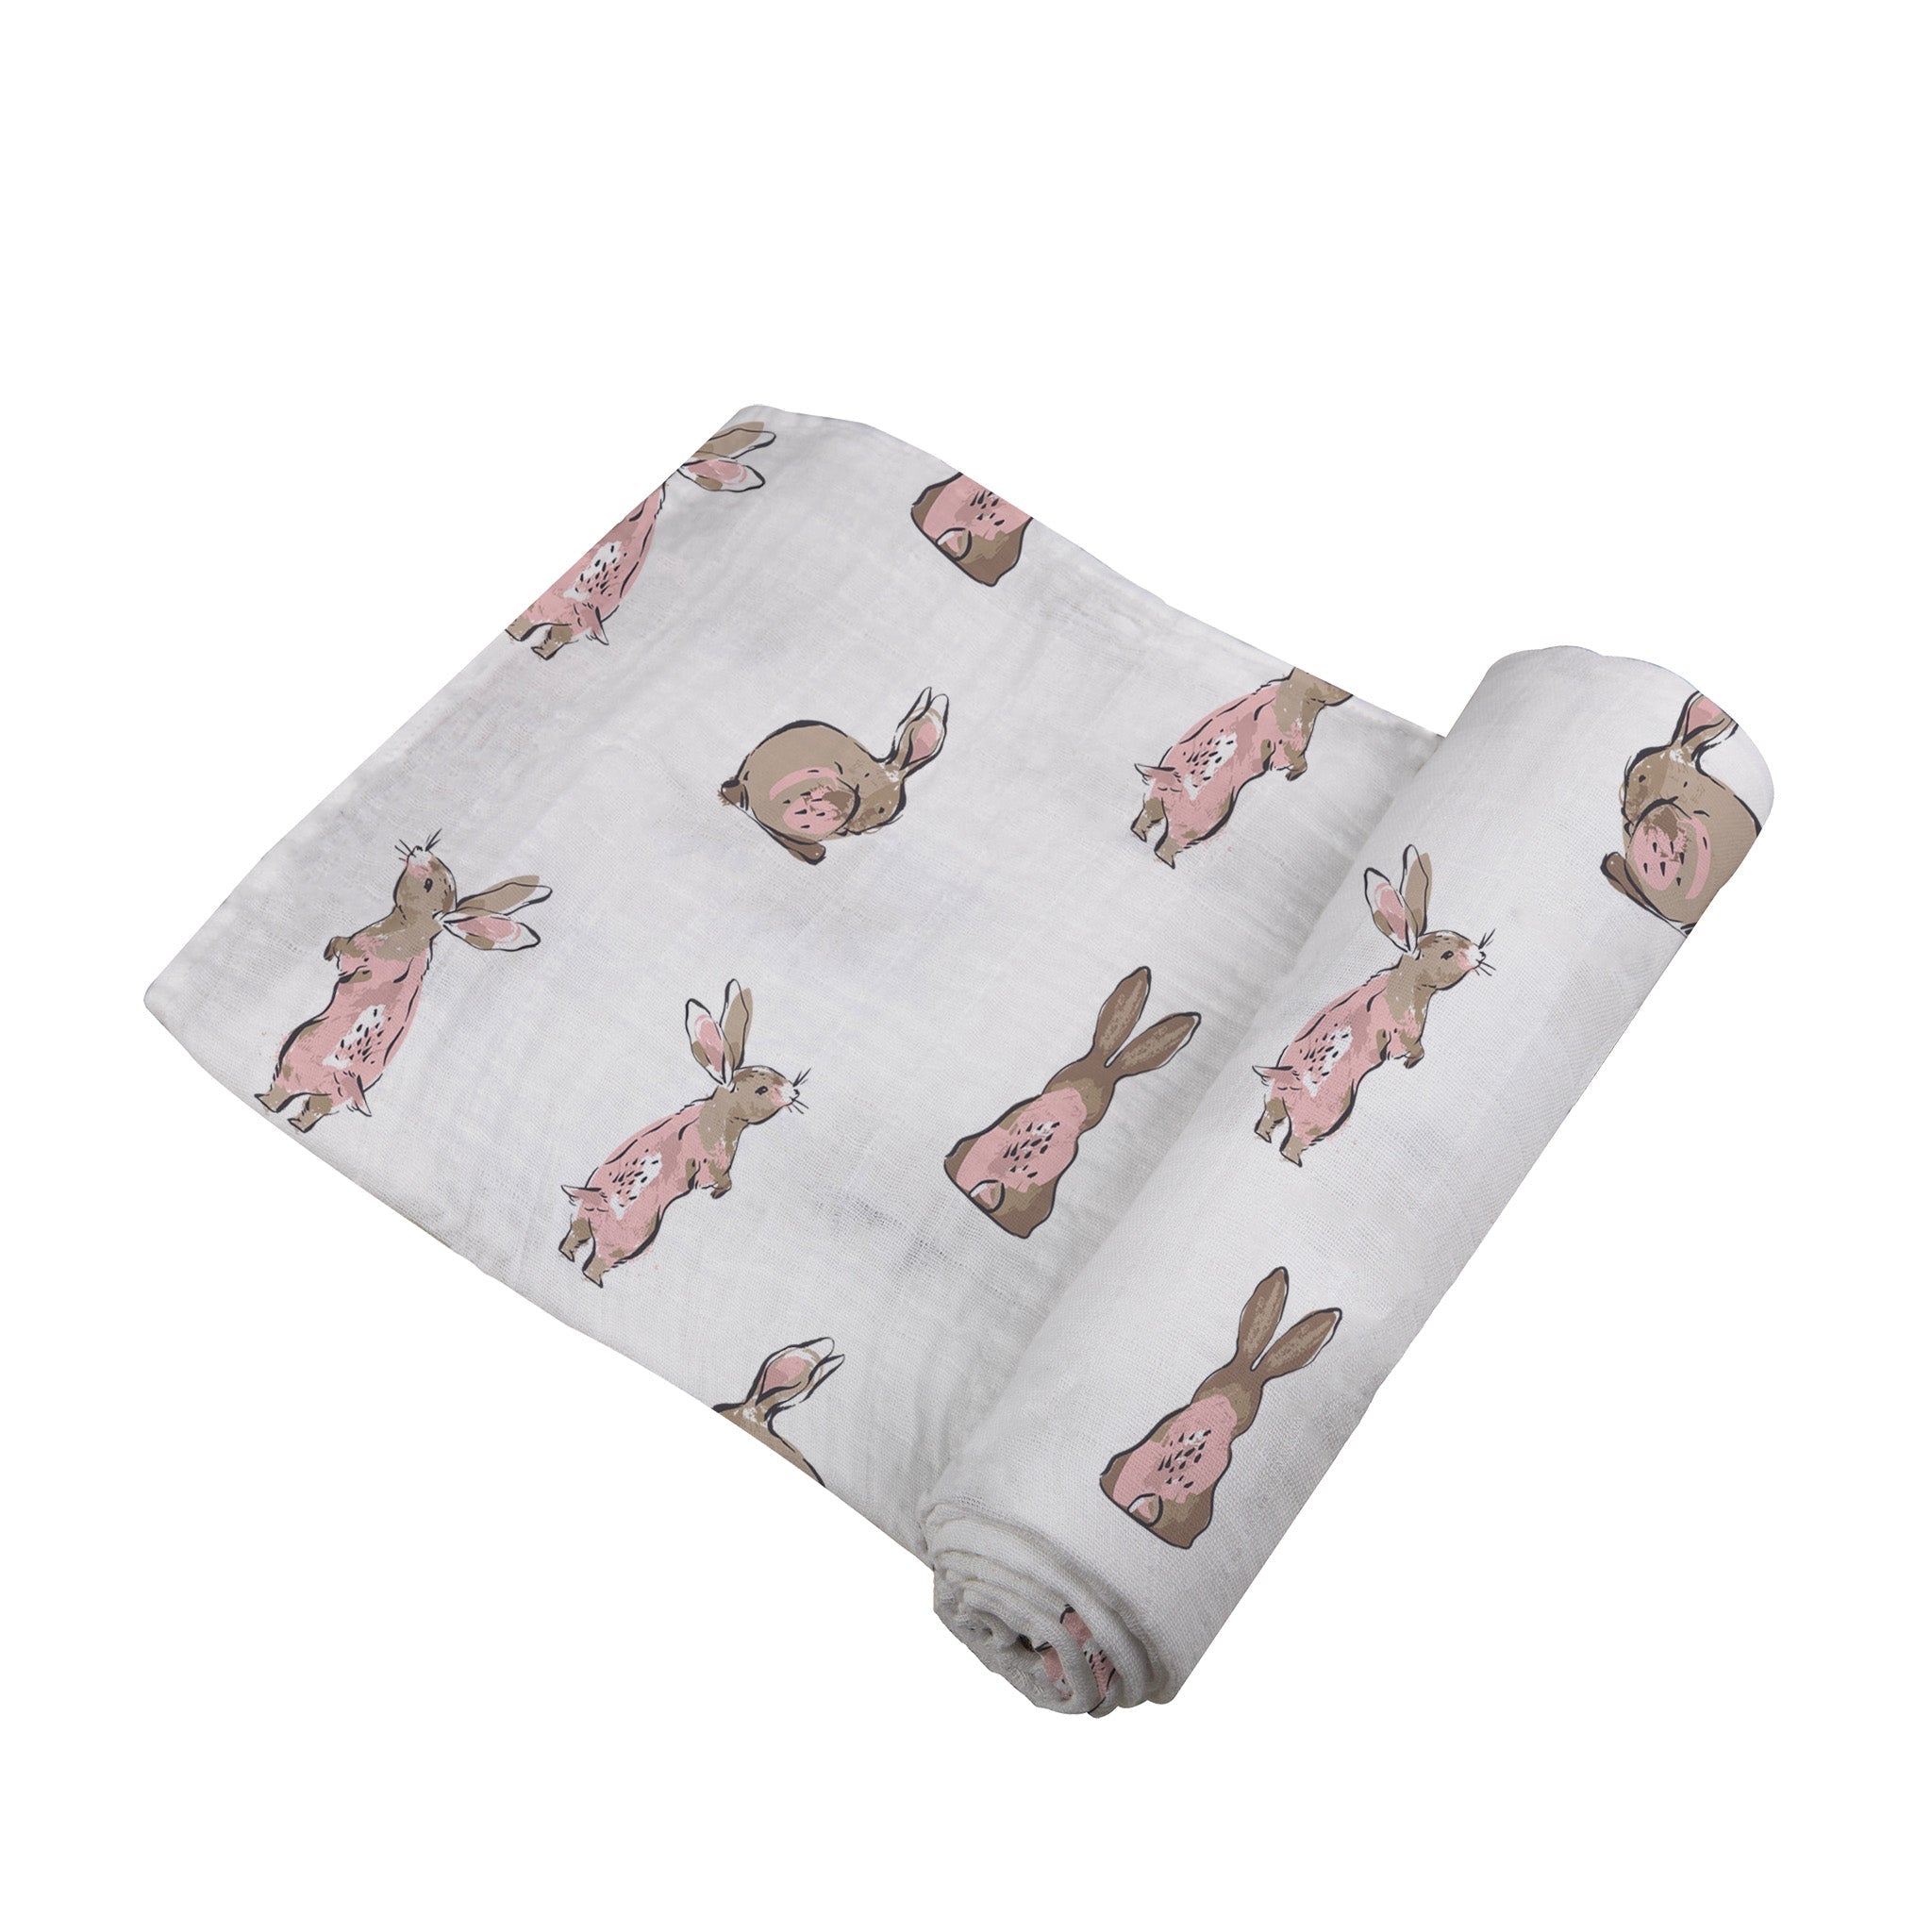 Swaddle for babies with bunnies